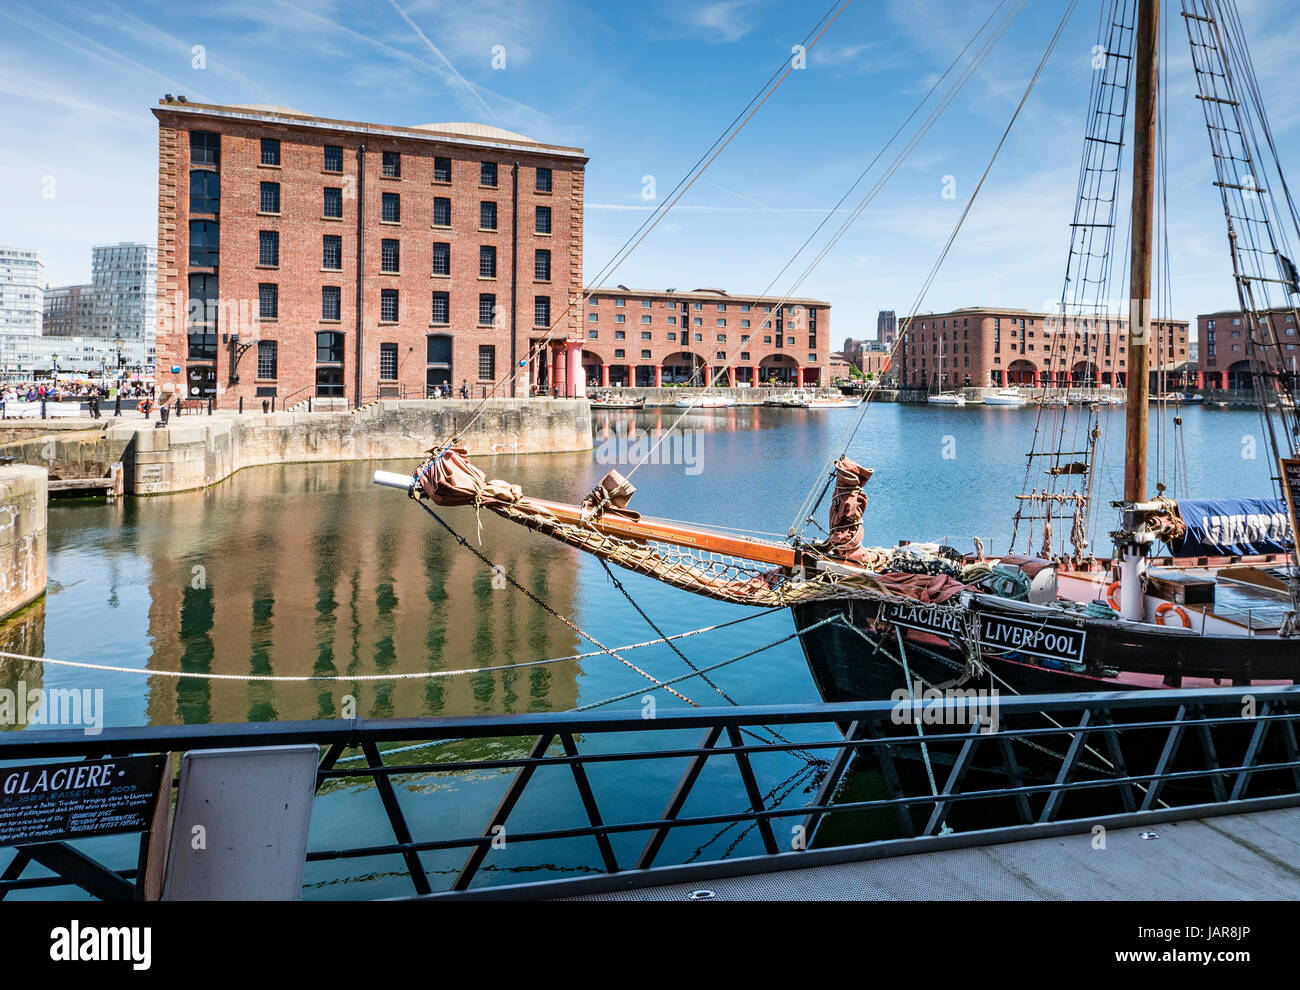 The Albert Dock complex of dock buildings and warehouses was opened in 1846, in Liverpool, England. Designed by Jesse Hartley and Philip Hardwick usin Stock Photo